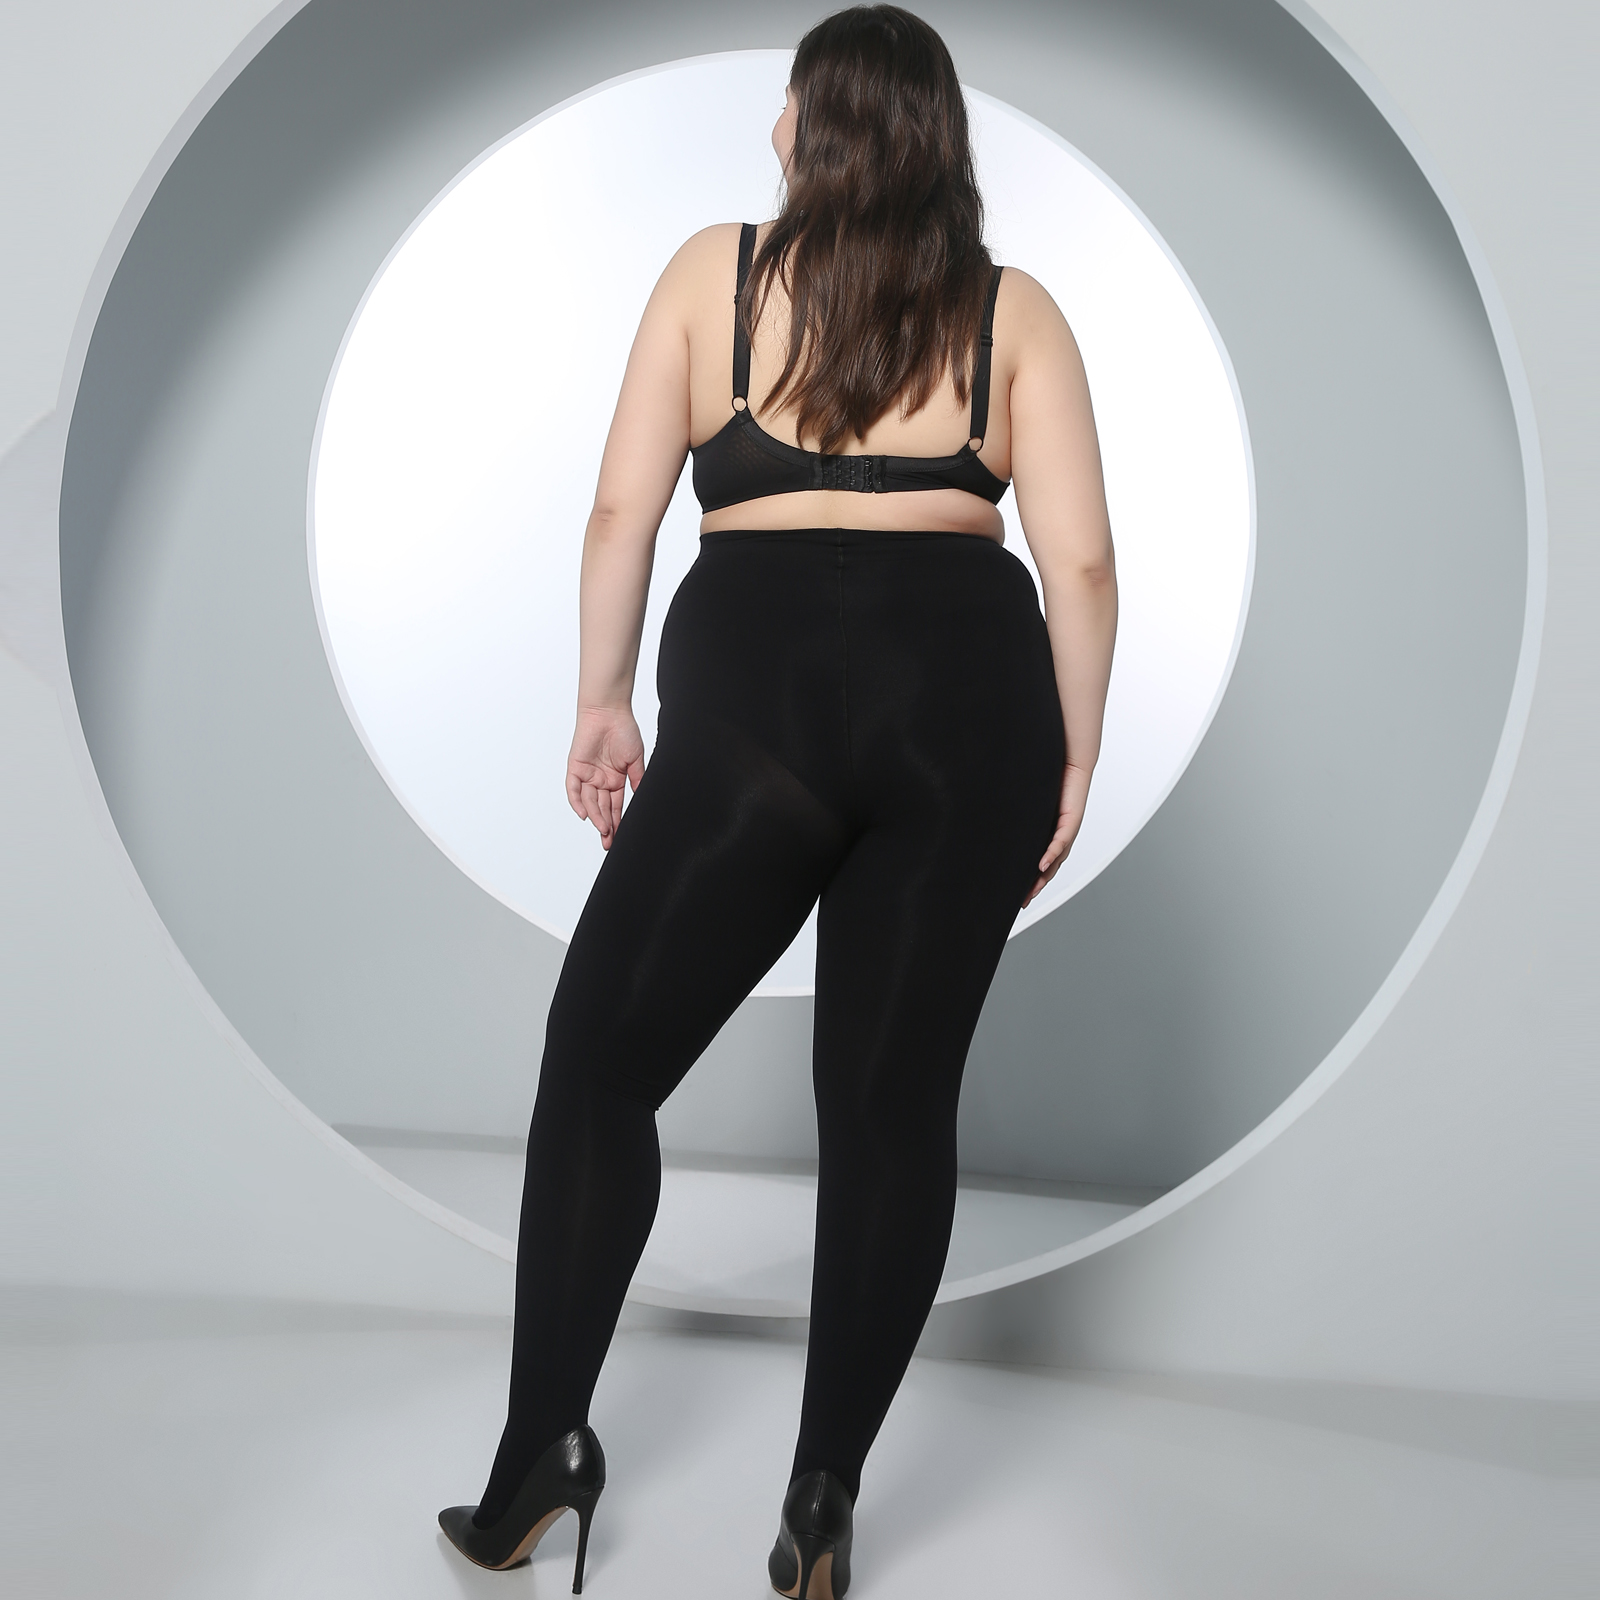 Plus Size Black 40D Opaque Control Top Tights